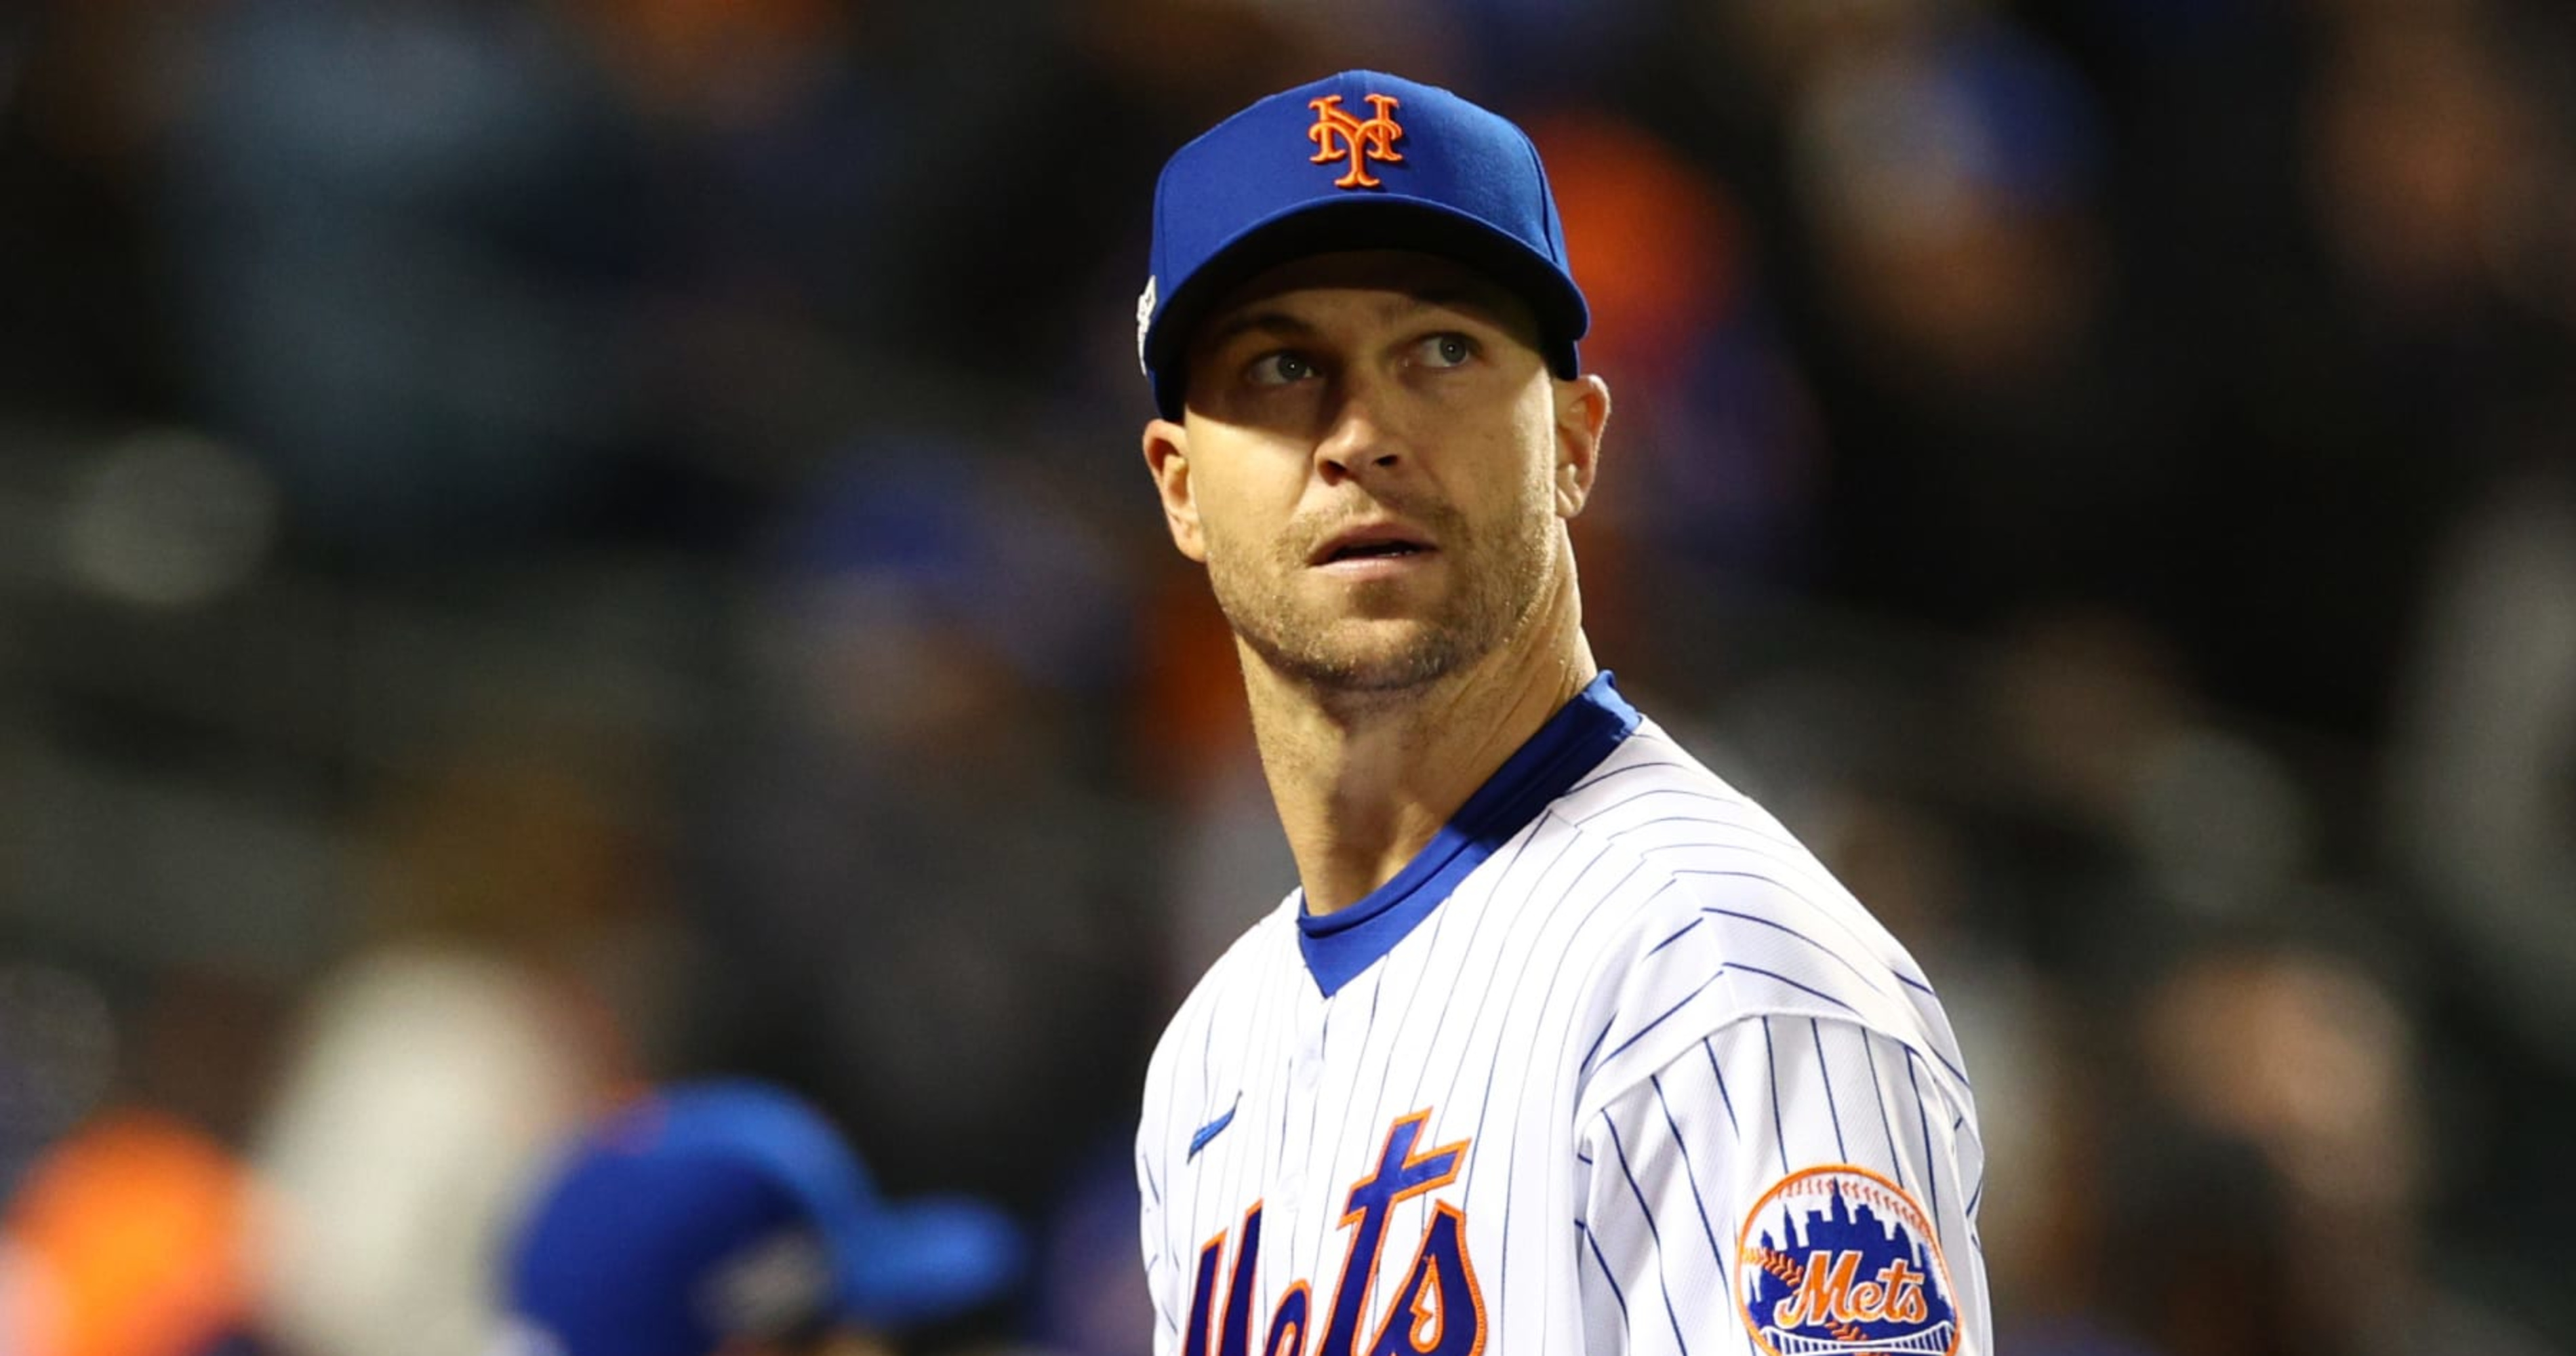 Jacob deGrom is Mets' only All-Star, and he won't pitch there